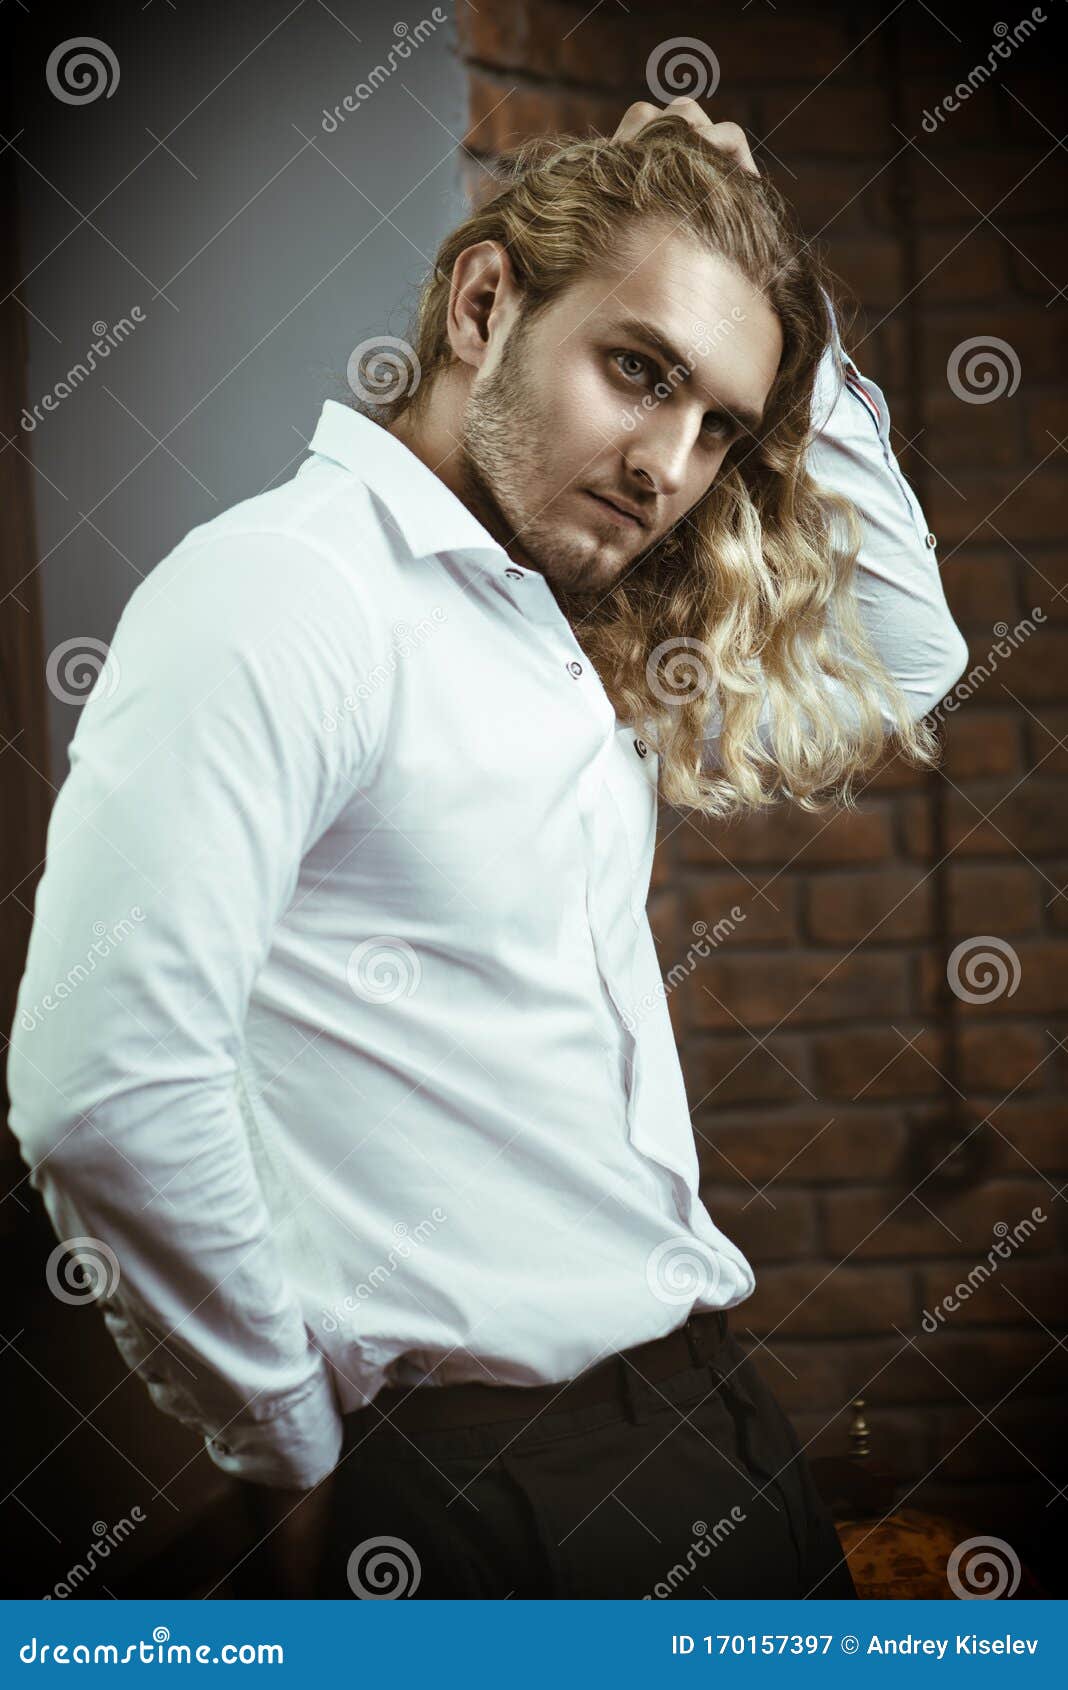 Guy with long hair stock image. Image of brutal, male - 170157397